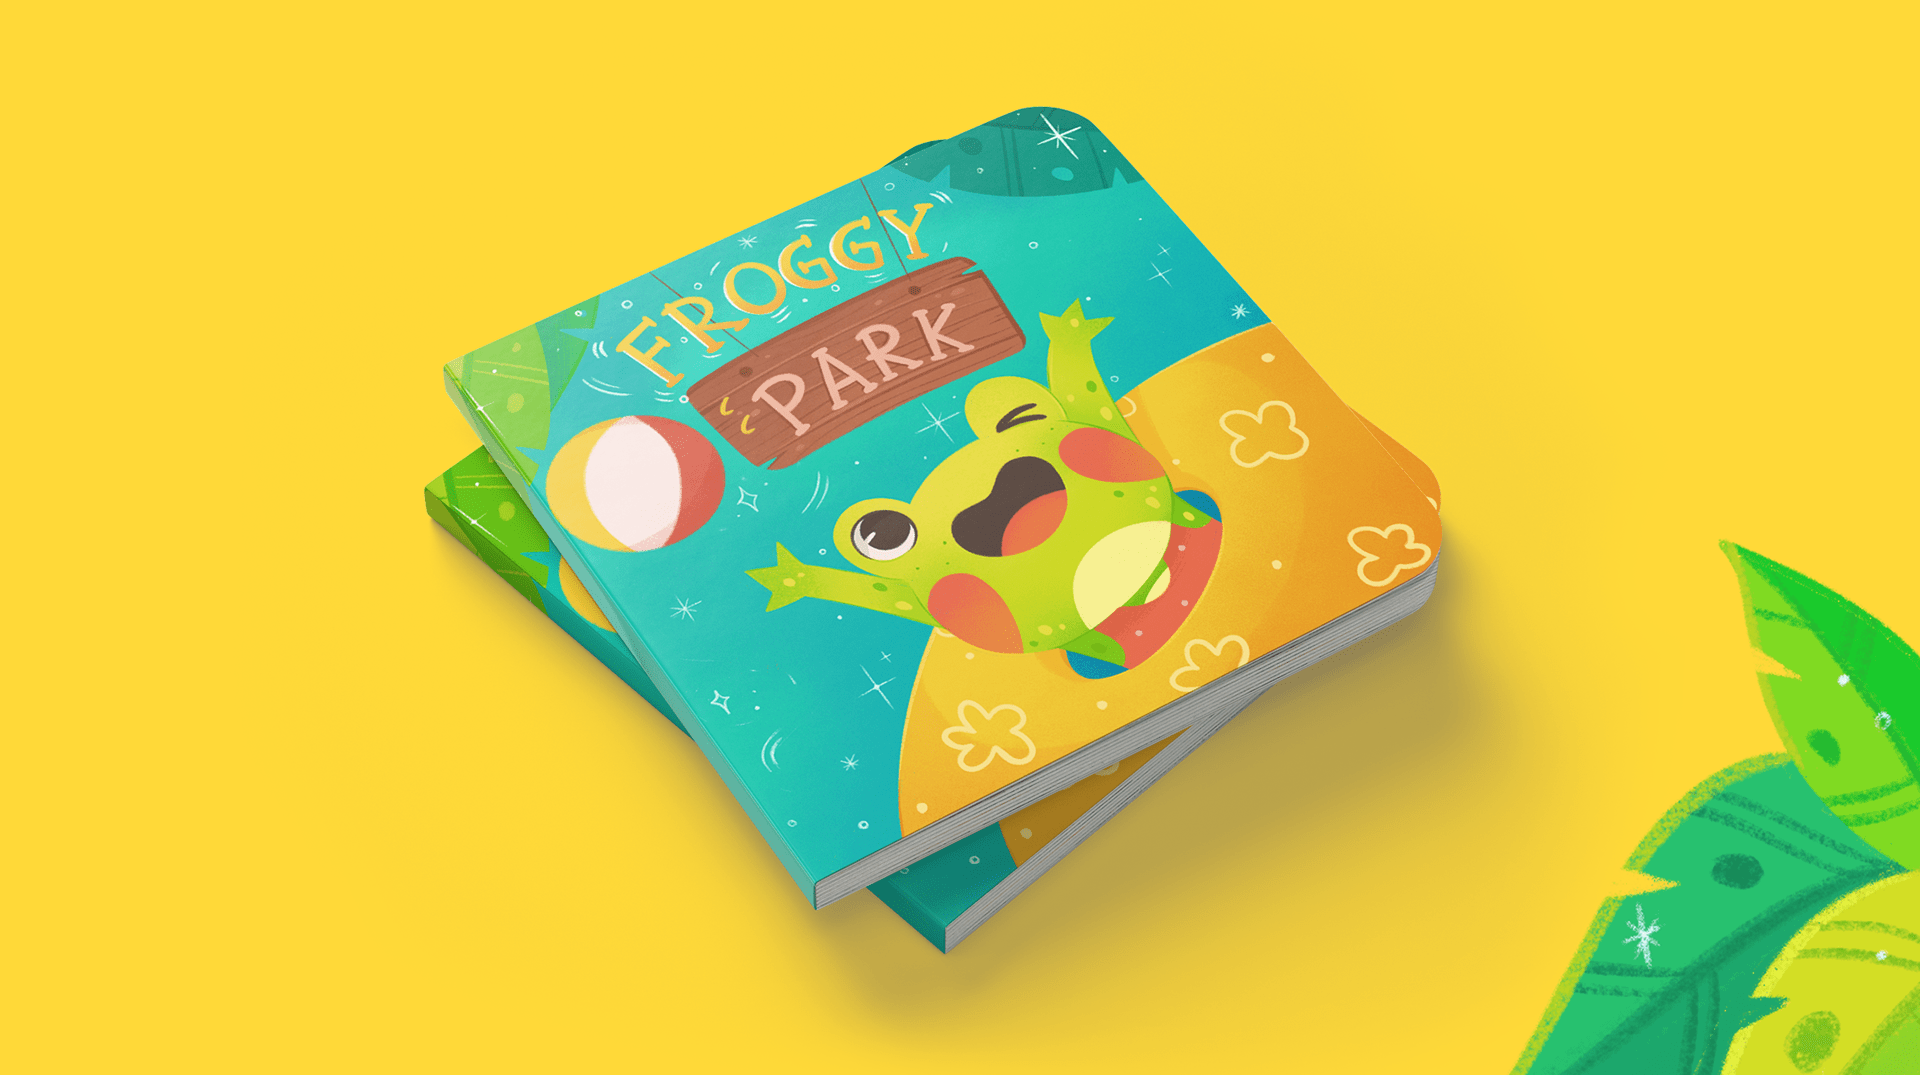 mockup of the book cover with frog character design illustration children art